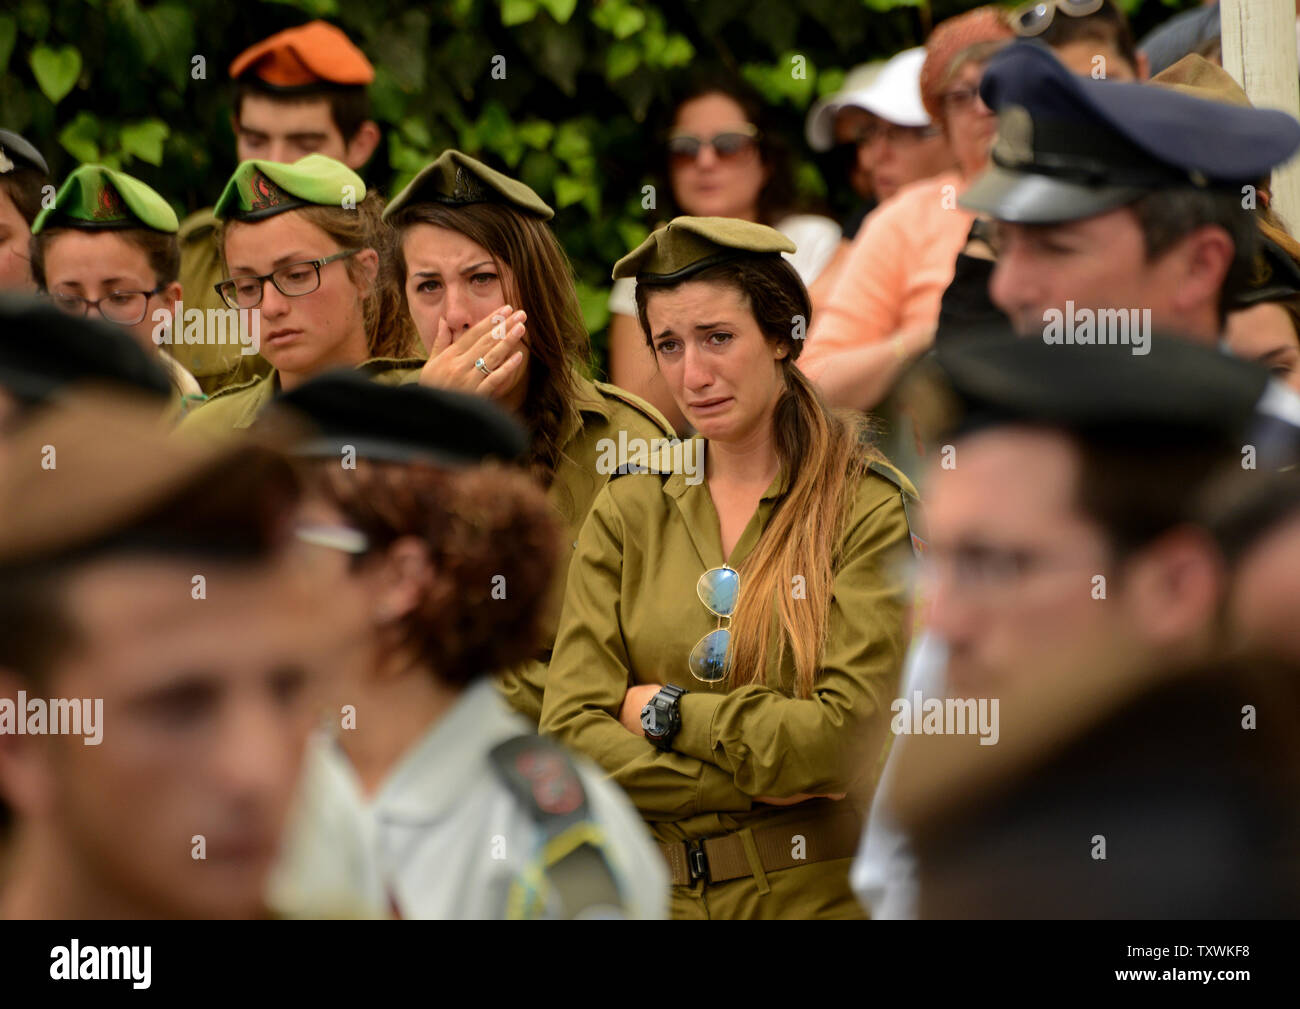 Israeli soldiers weep during the funeral of American-Israeli soldier Max Steinberg, 24, in the military cemetery on Mt. Herzl in Jerusalem, Israel, July 23, 2014.  Steinberg, a native of Los Angeles, California, immigrated to Israel and enlisted in the Israel Defense Forces in 2012, where he served as a sharpshooter in the elite Golani Brigade. He was among the 13 soldiers killed by Palestinian militants in the Gaza Strip on Sunday. Twenty-nine Israeli troops have been killed since the army launched a ground incursion into Gaza last week. More than 30,000 people attended the funeral. UPI/Debbi Stock Photo